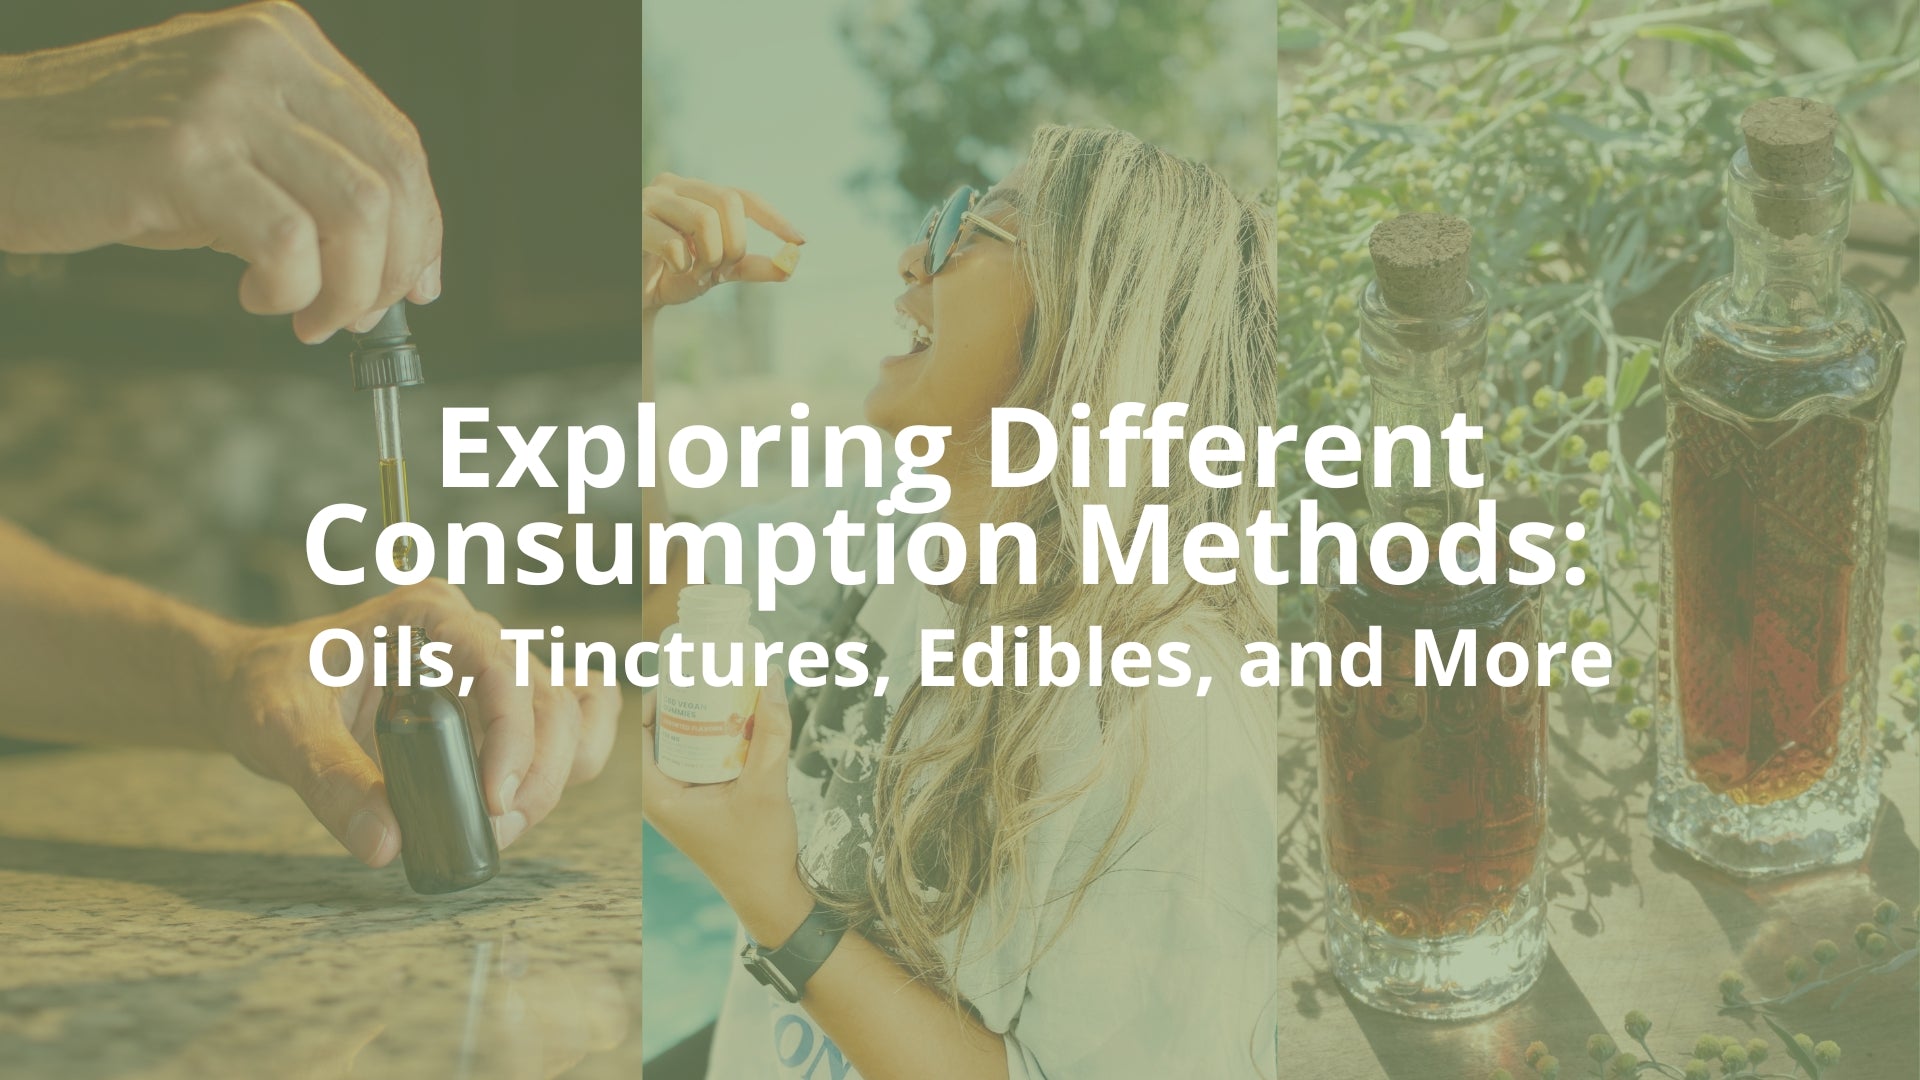 Exploring Different Consumption Methods: Oils, Tinctures, Edibles, and More